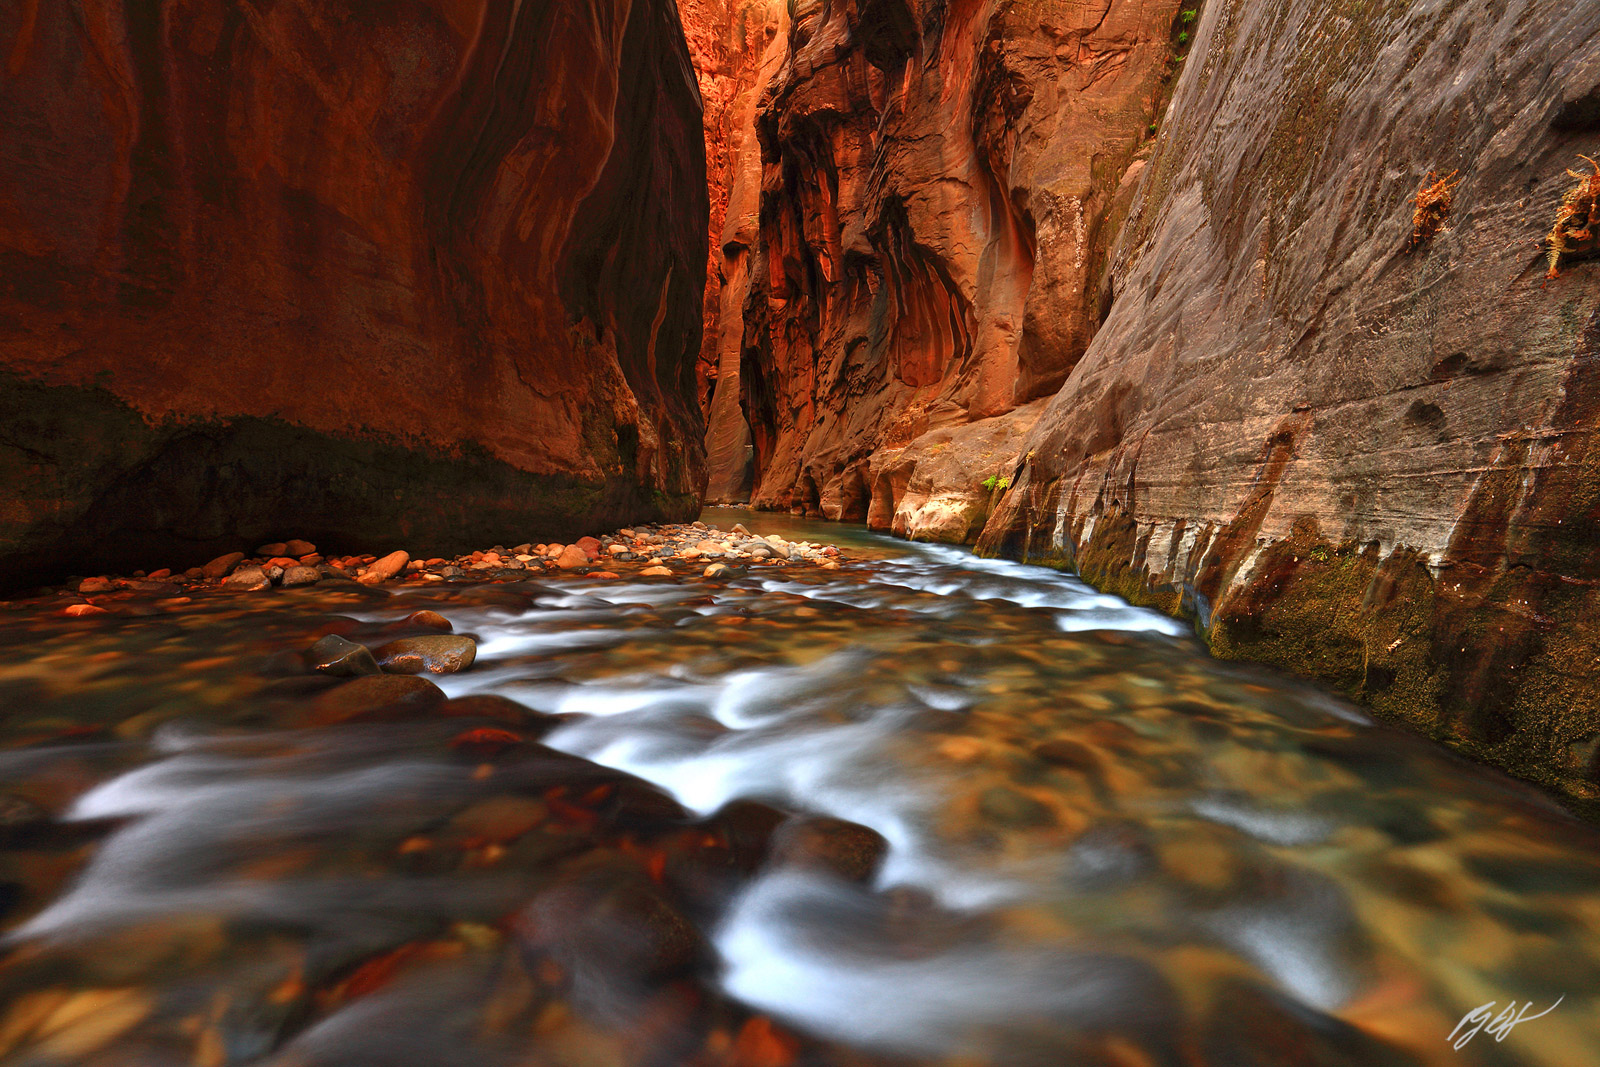 The Virgin River as it flows through The Narrows in Zion National Park in Utah